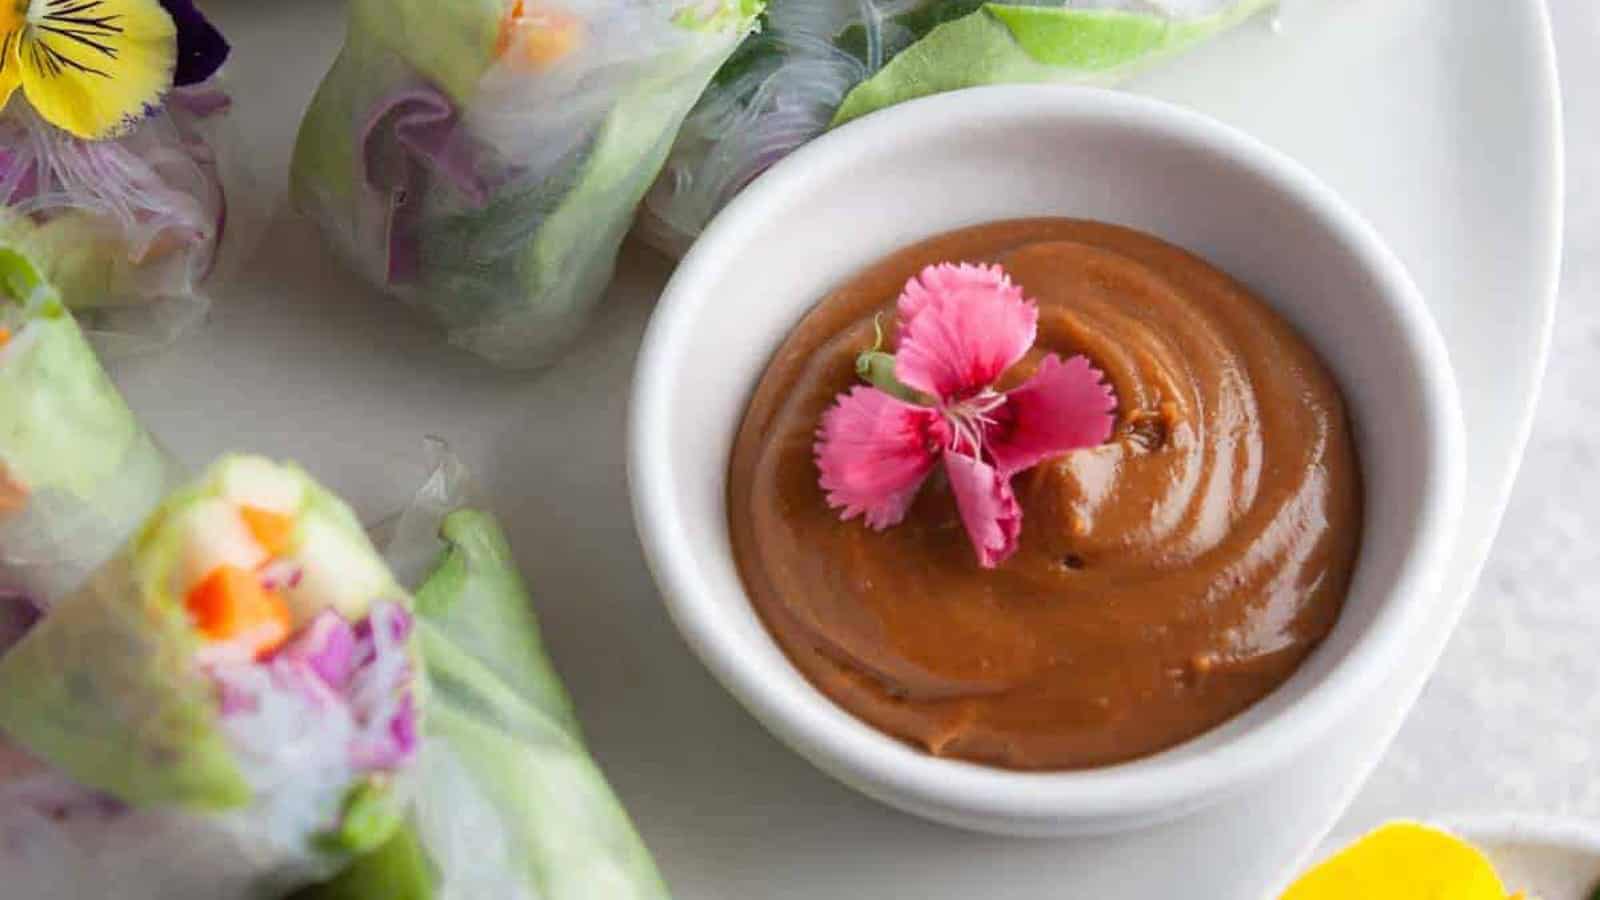 A bowl of Vietnamese peanut sauce with an edible flower and fresh rolls on the side.